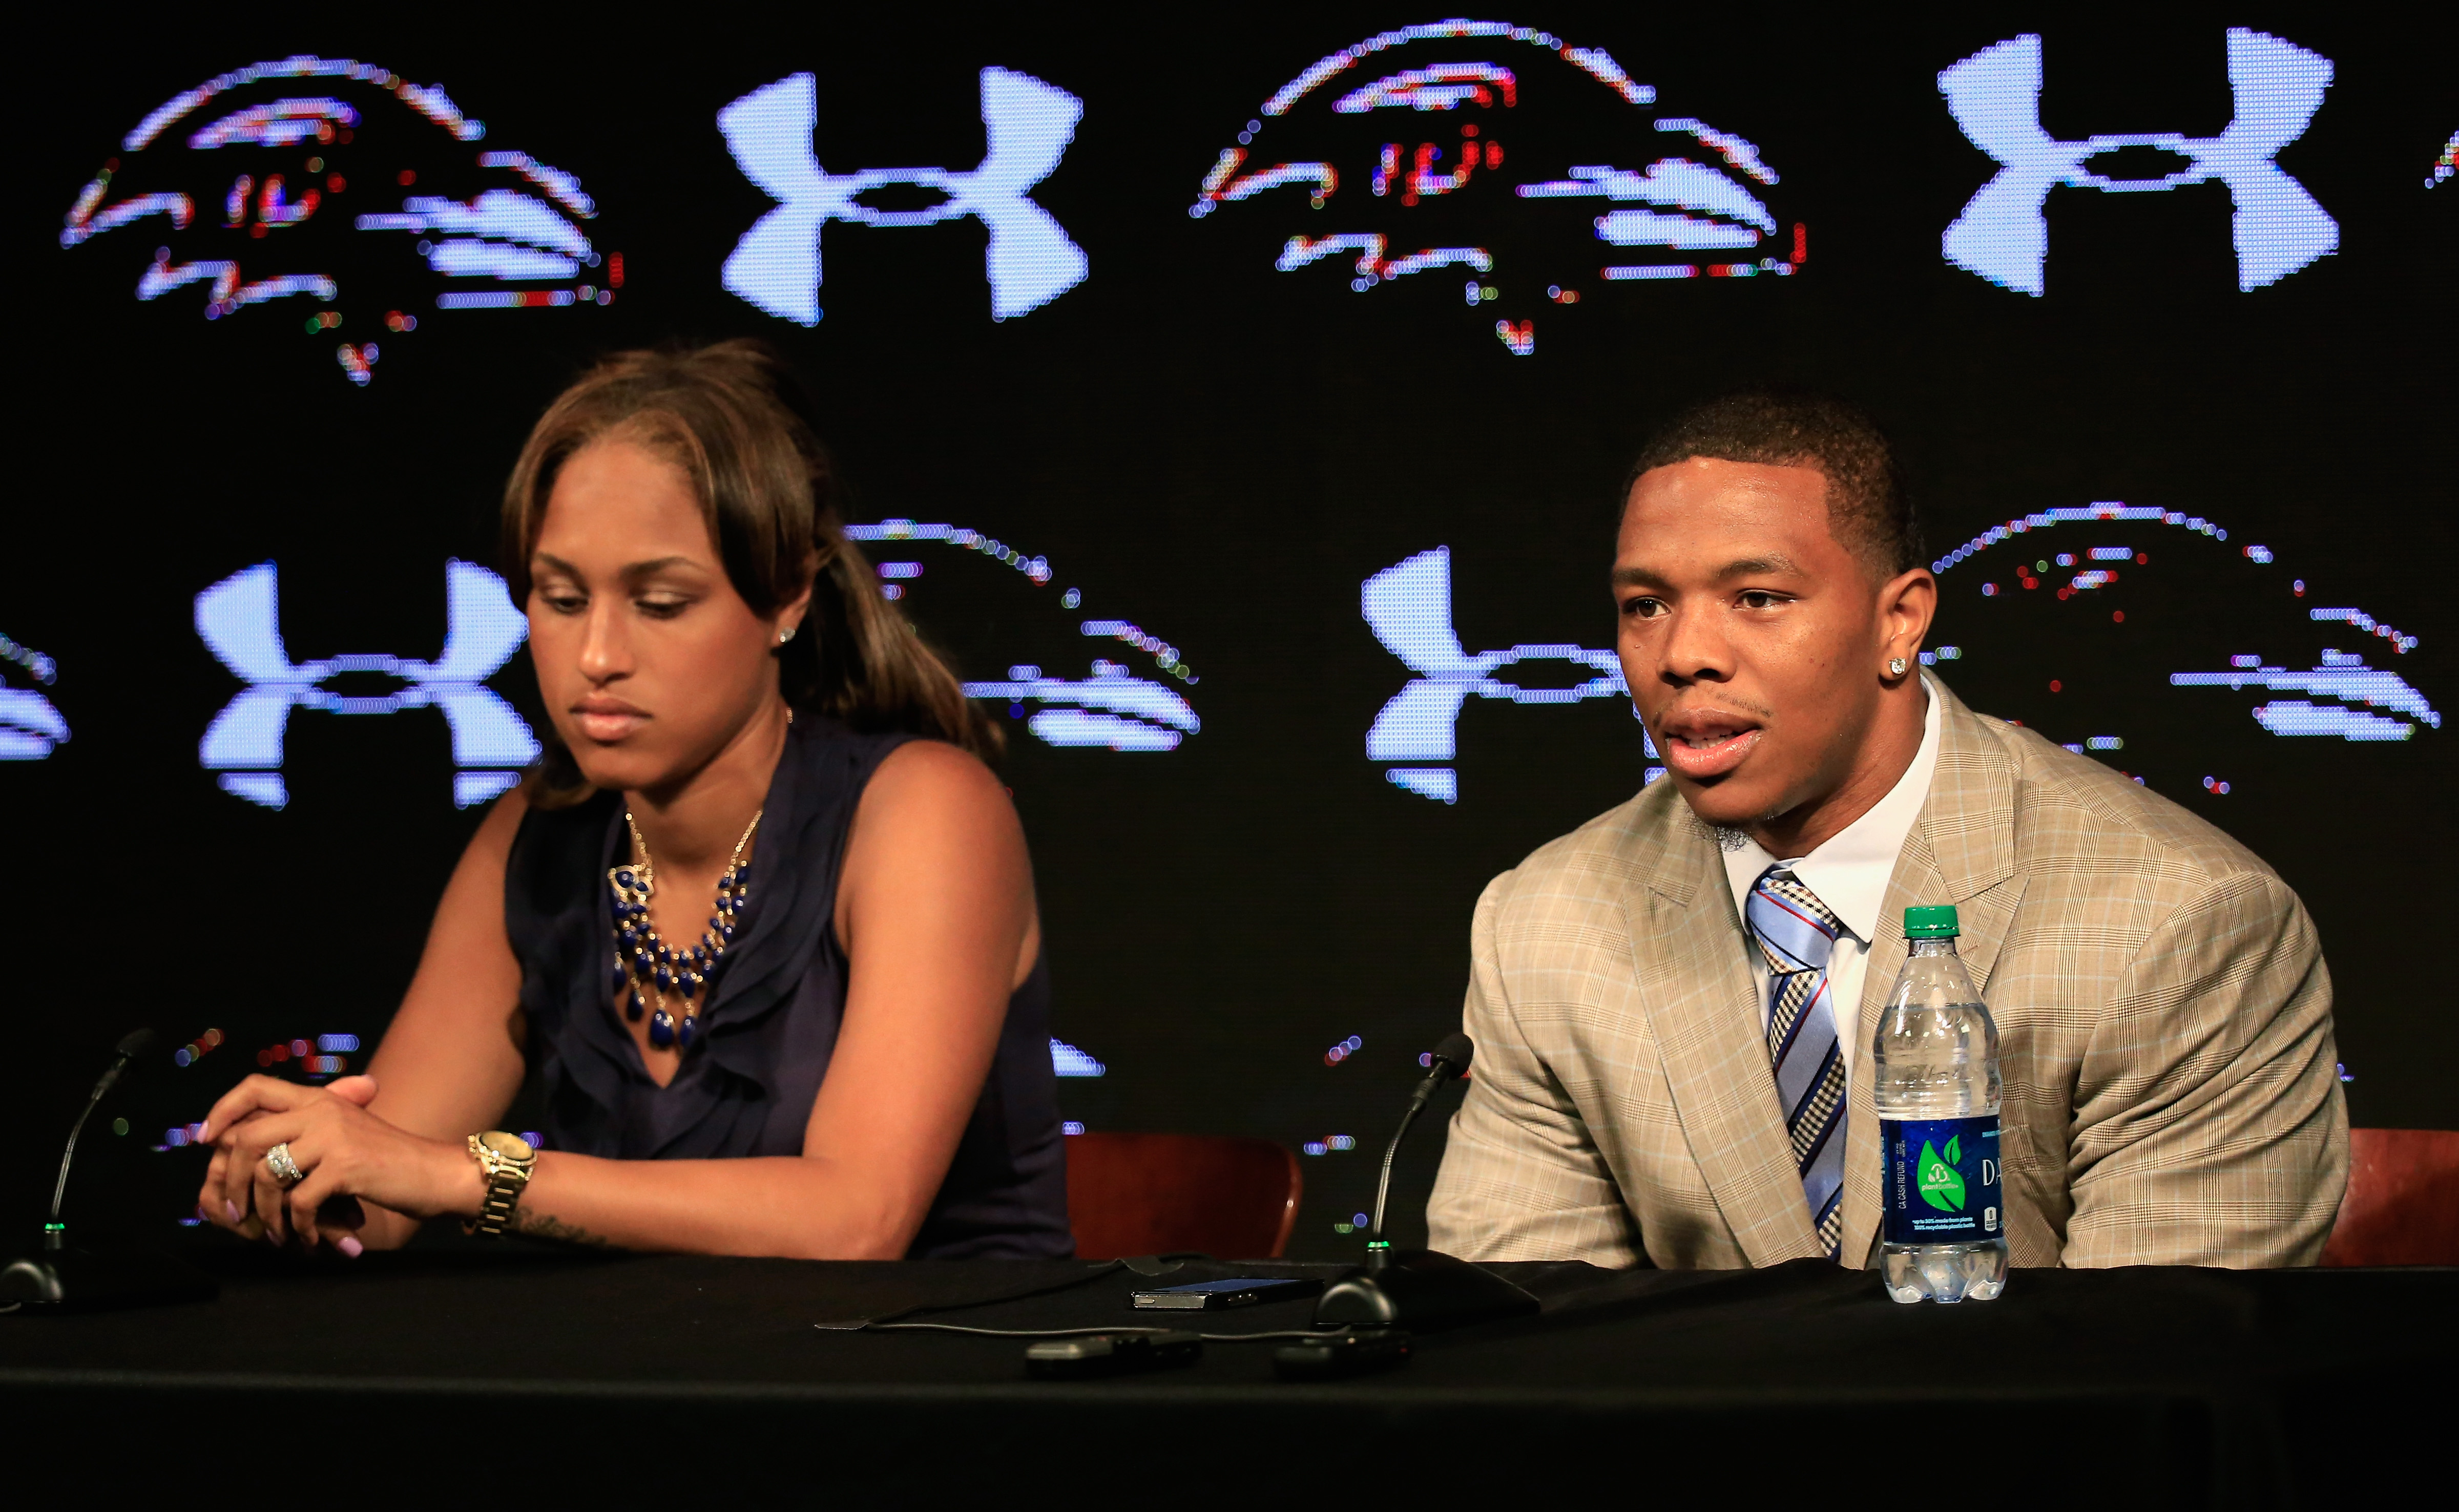 Ray Rice Press Conference